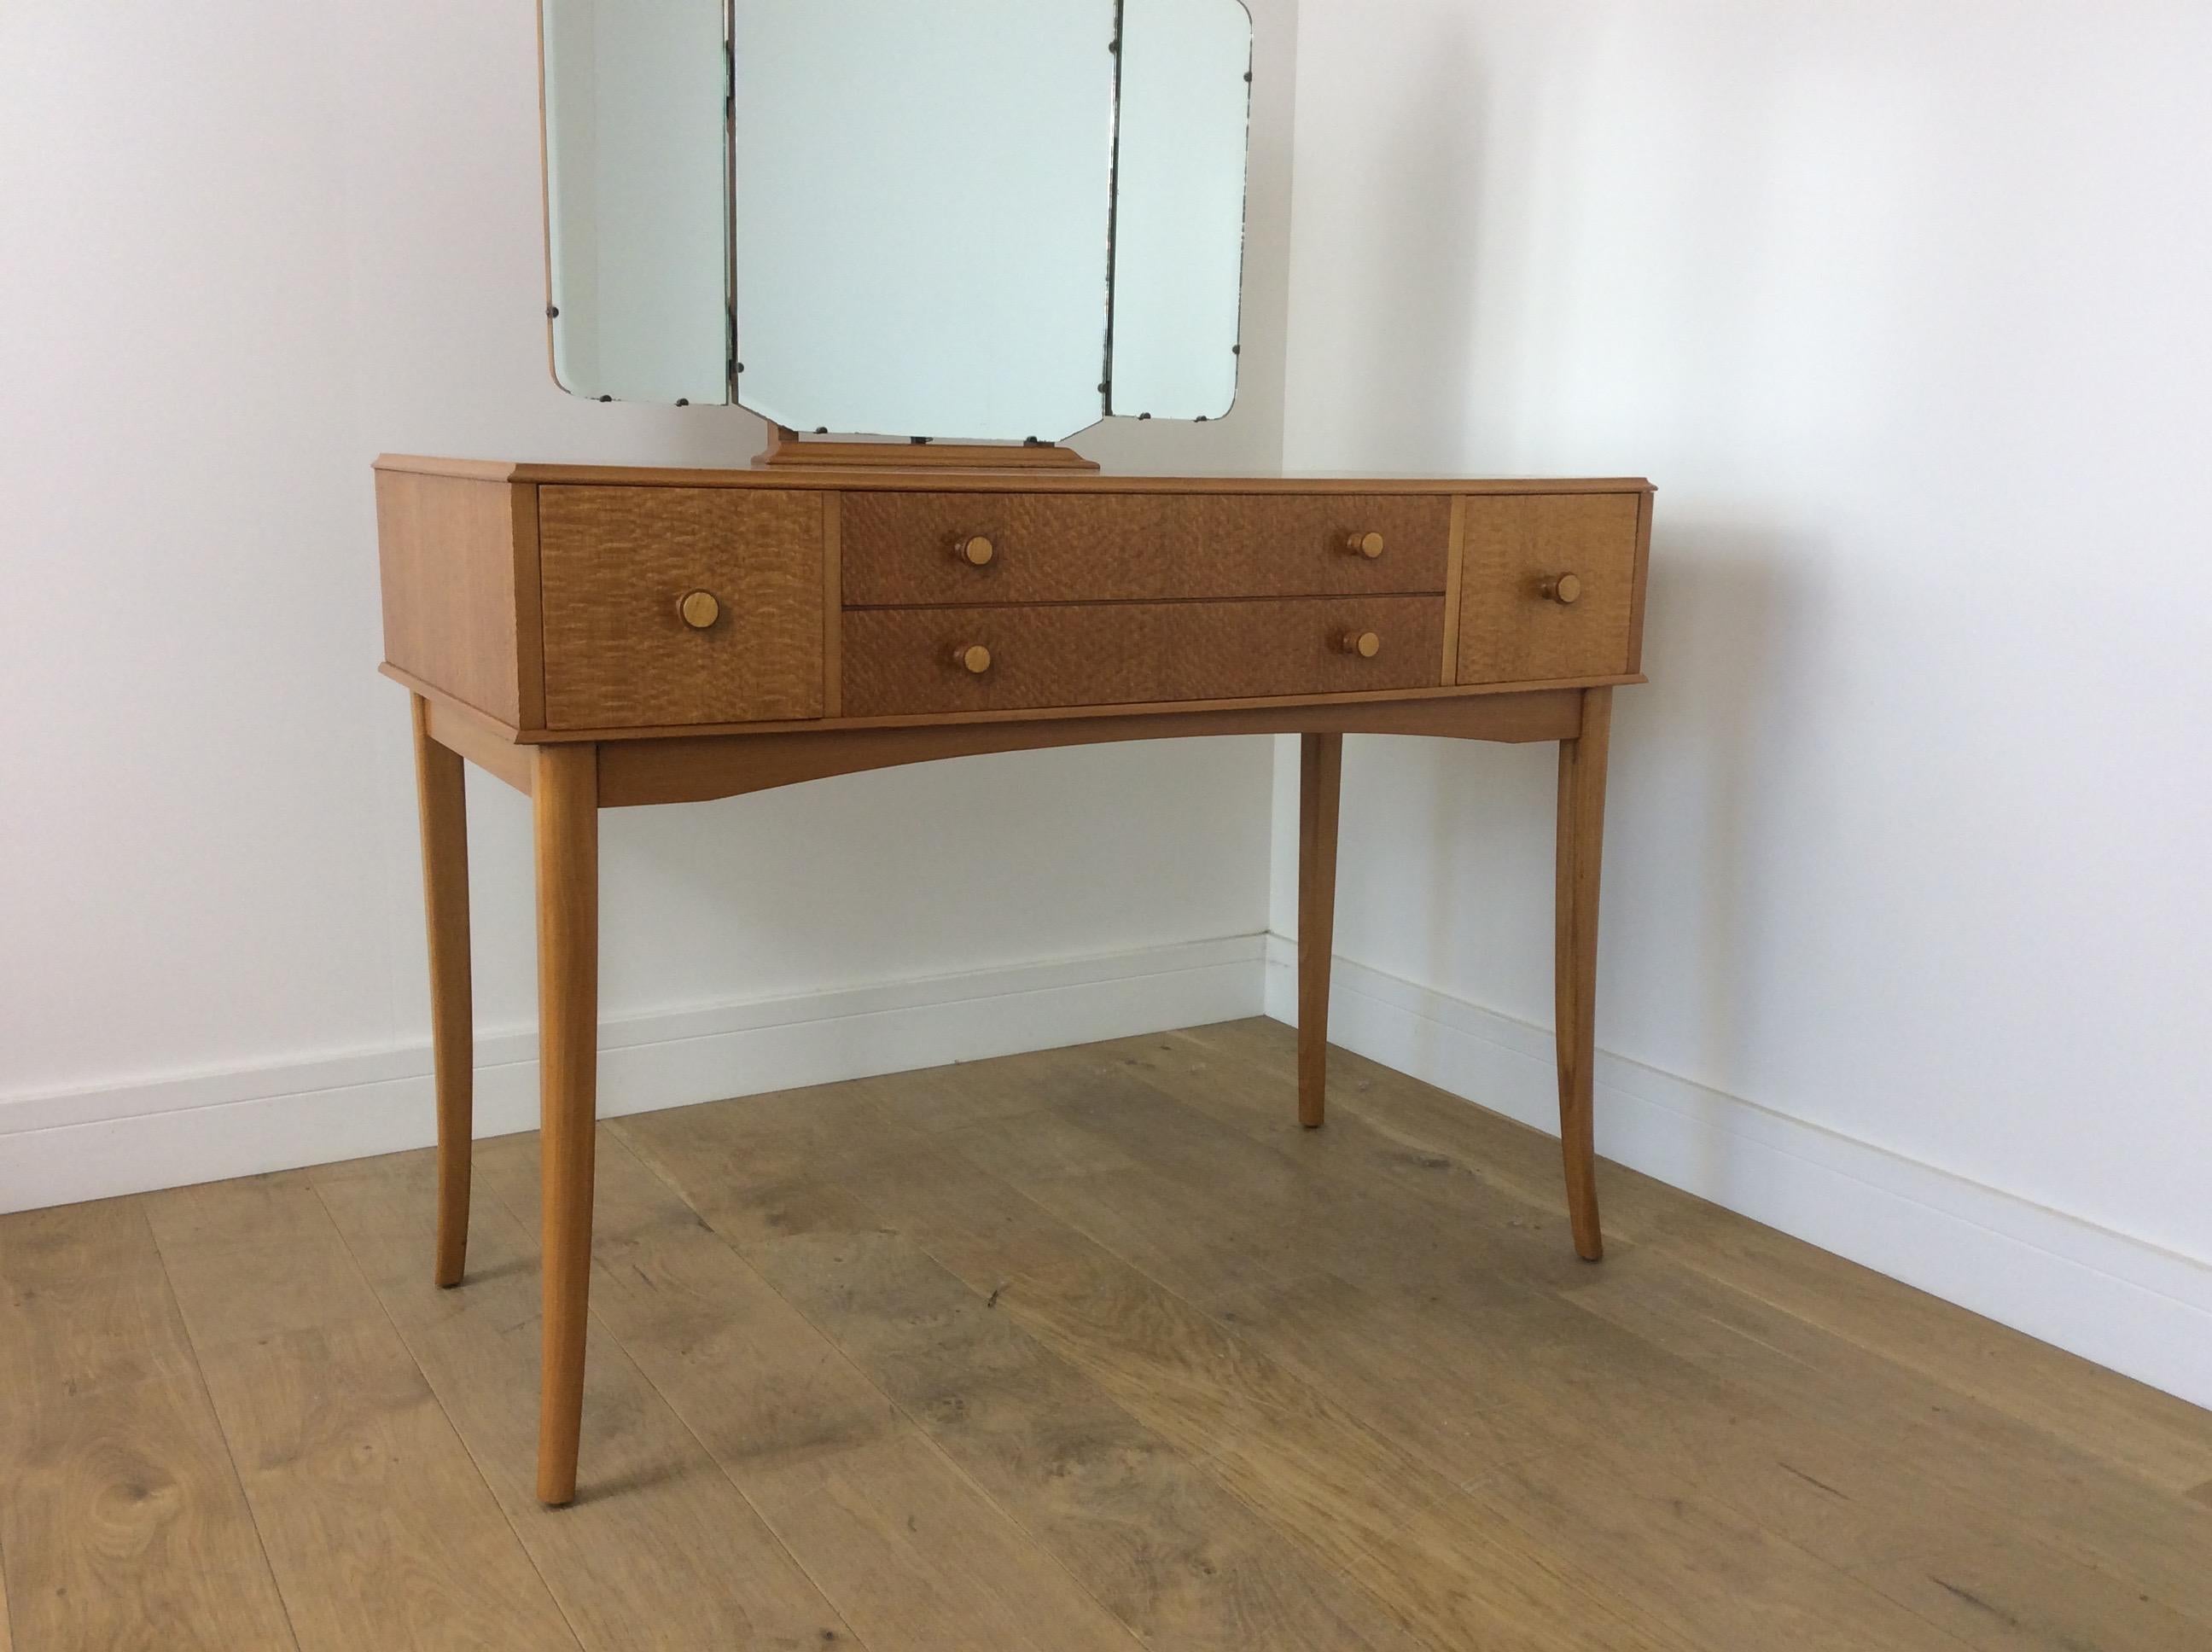 Midcentury dressing table in a stunning lacewood.
Measures: 134 cm H to the top of the mirror, 78.5 cm H at the front 108 cm W 50 cm D
British, circa 1960.